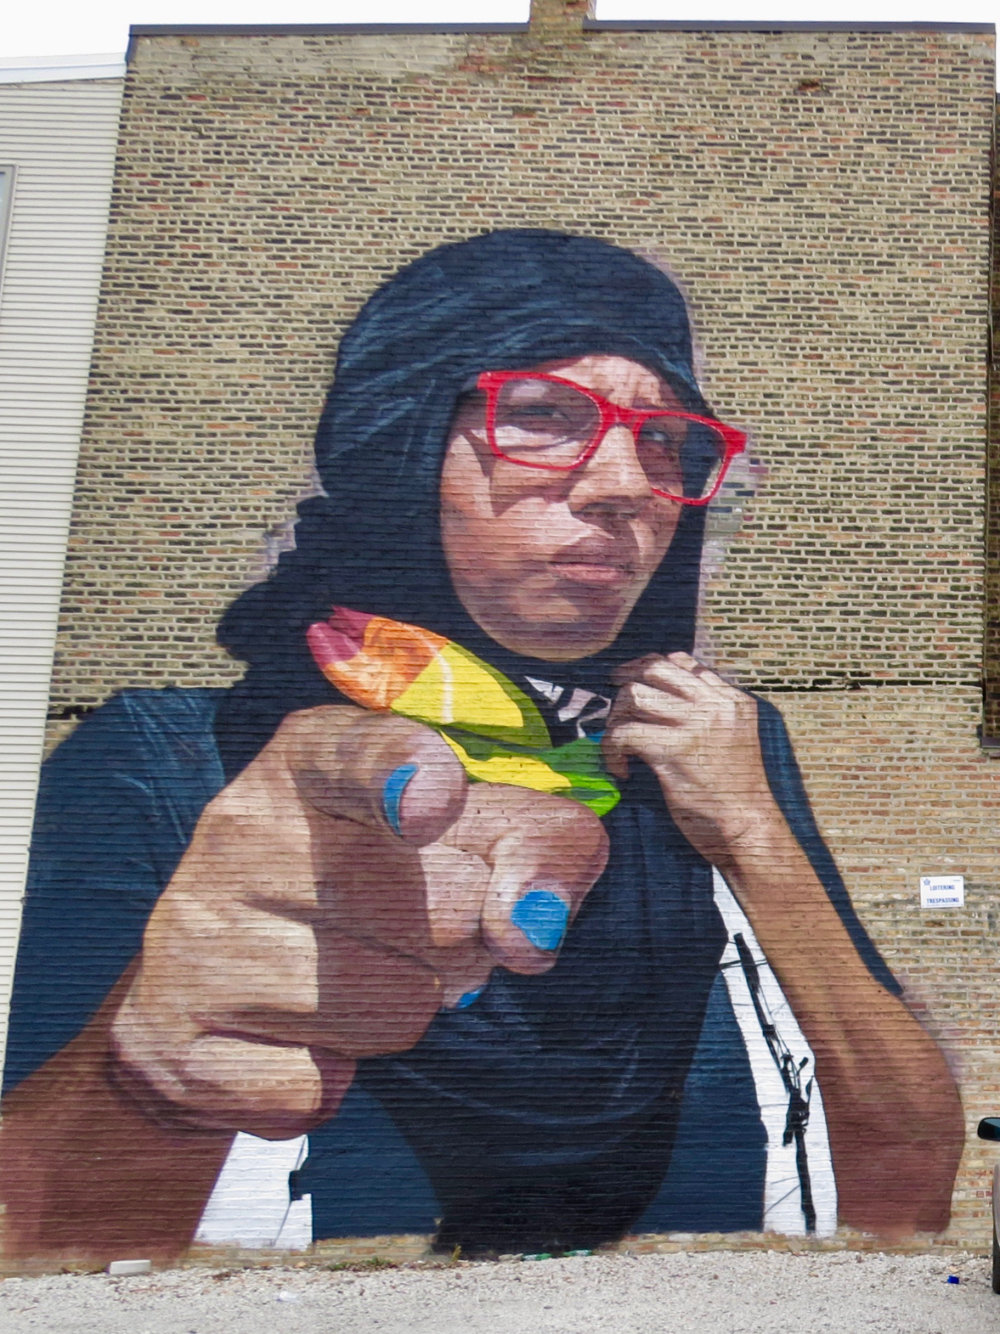 mural in Chicago by artist Alejandro Rodriguez.